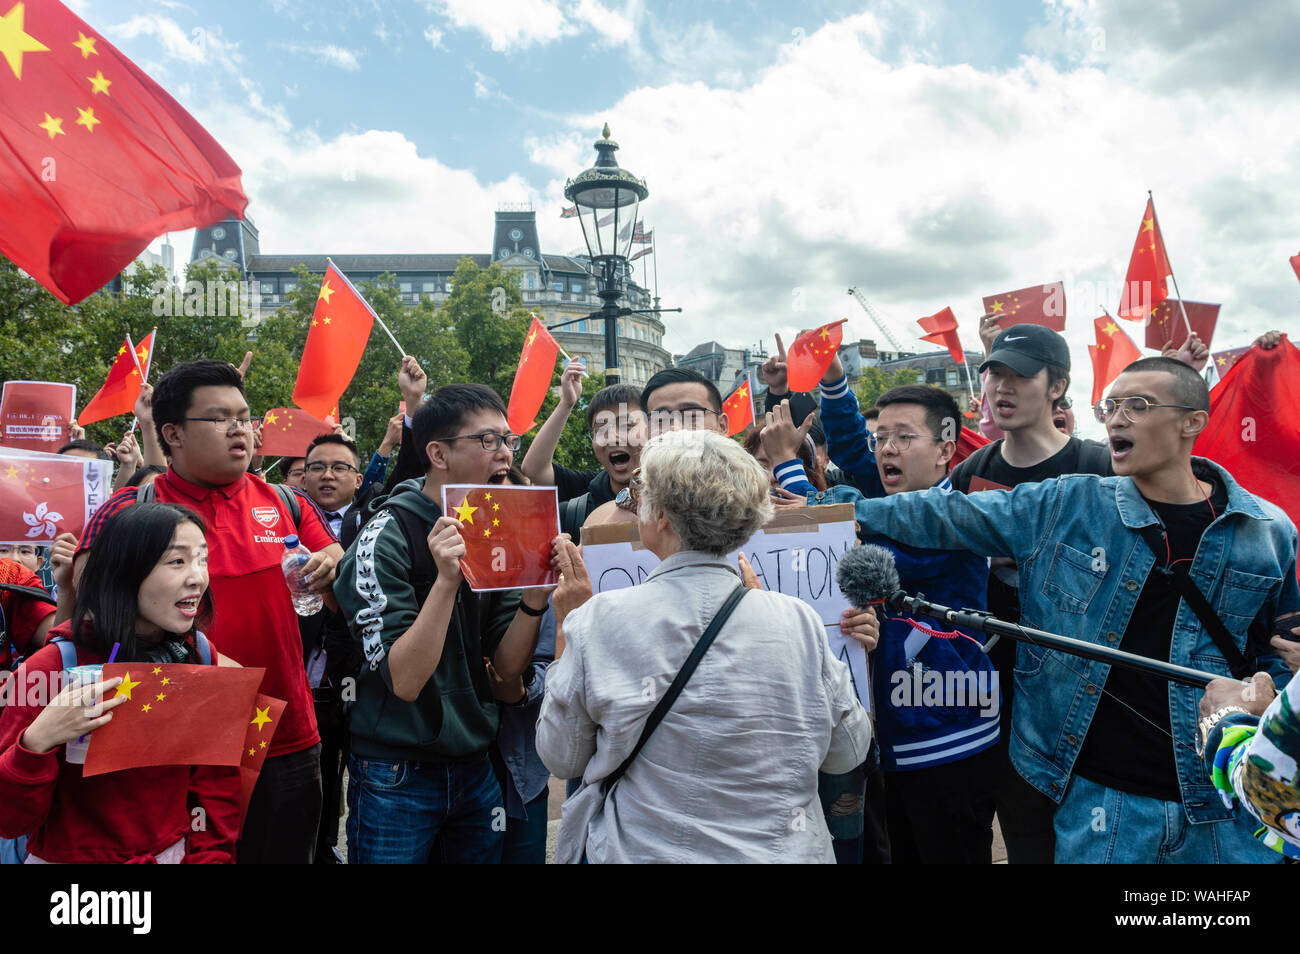 London, United Kingdom - August 17,  2019: Female British national going against opponents of the UK Solidarity with Hong Kong rally. Stock Photo